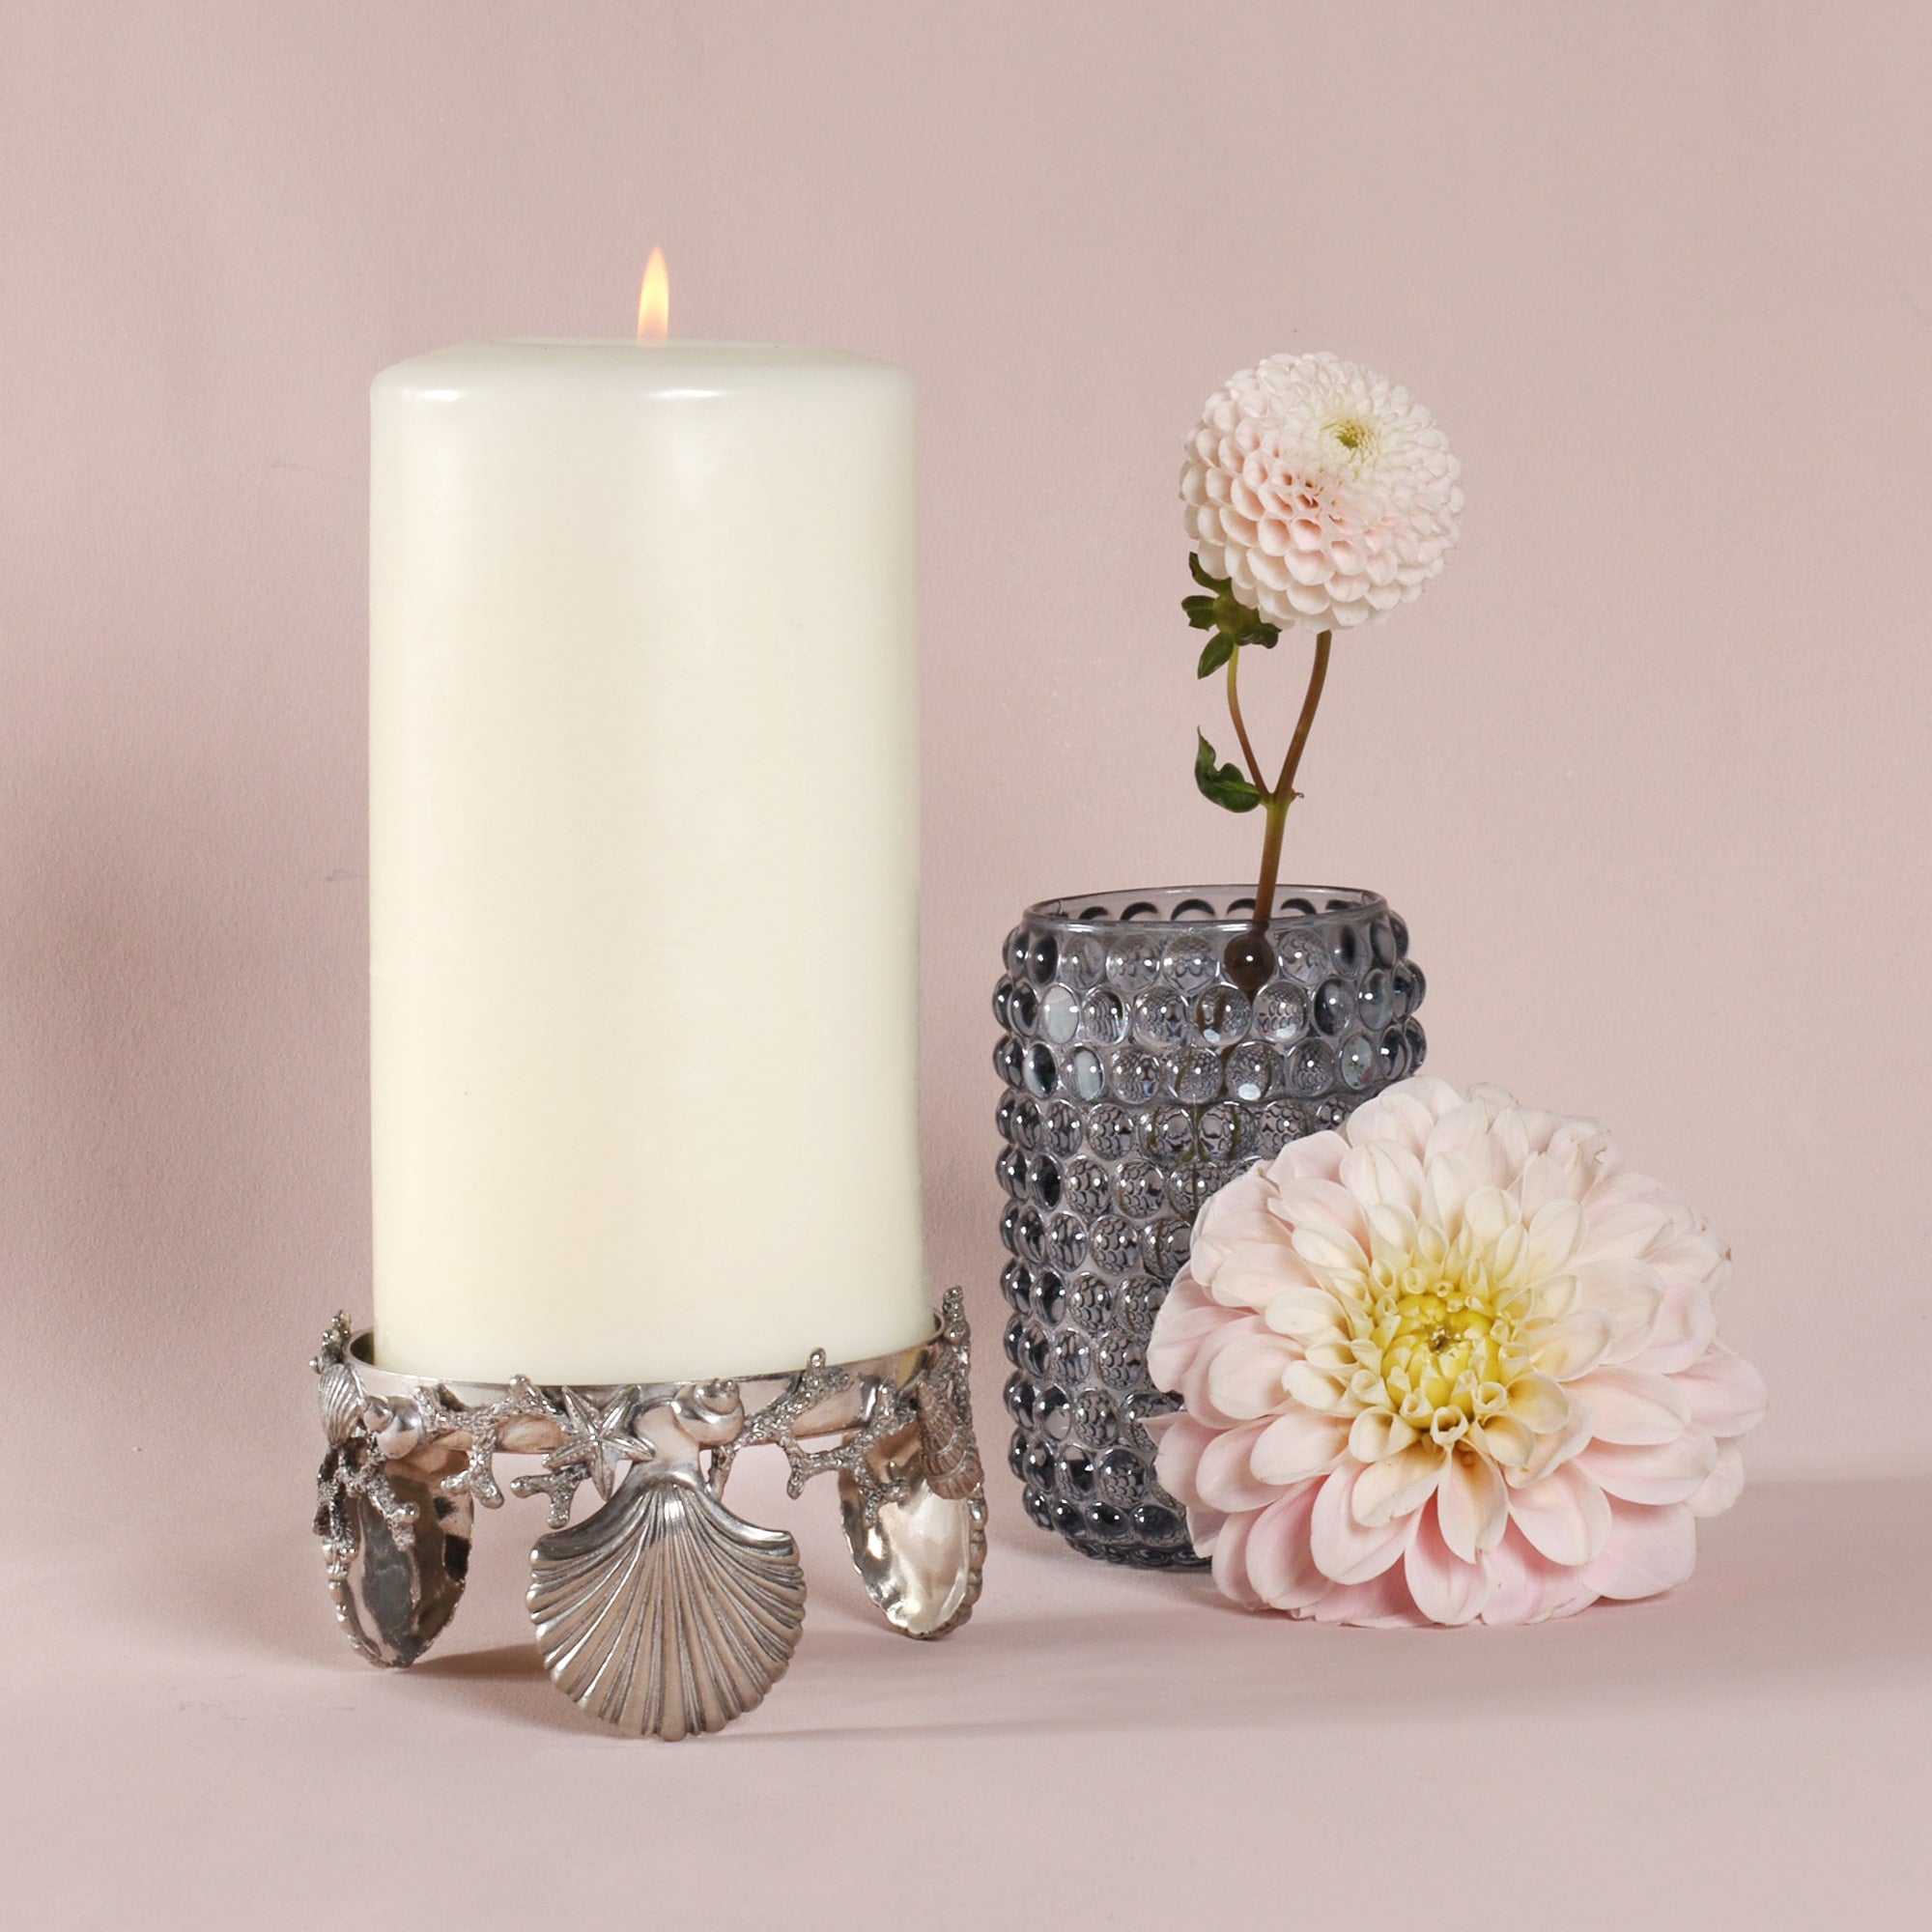 Shell and Coral Candle Holder holding a large candle.Next to the item is a glass containing flowers